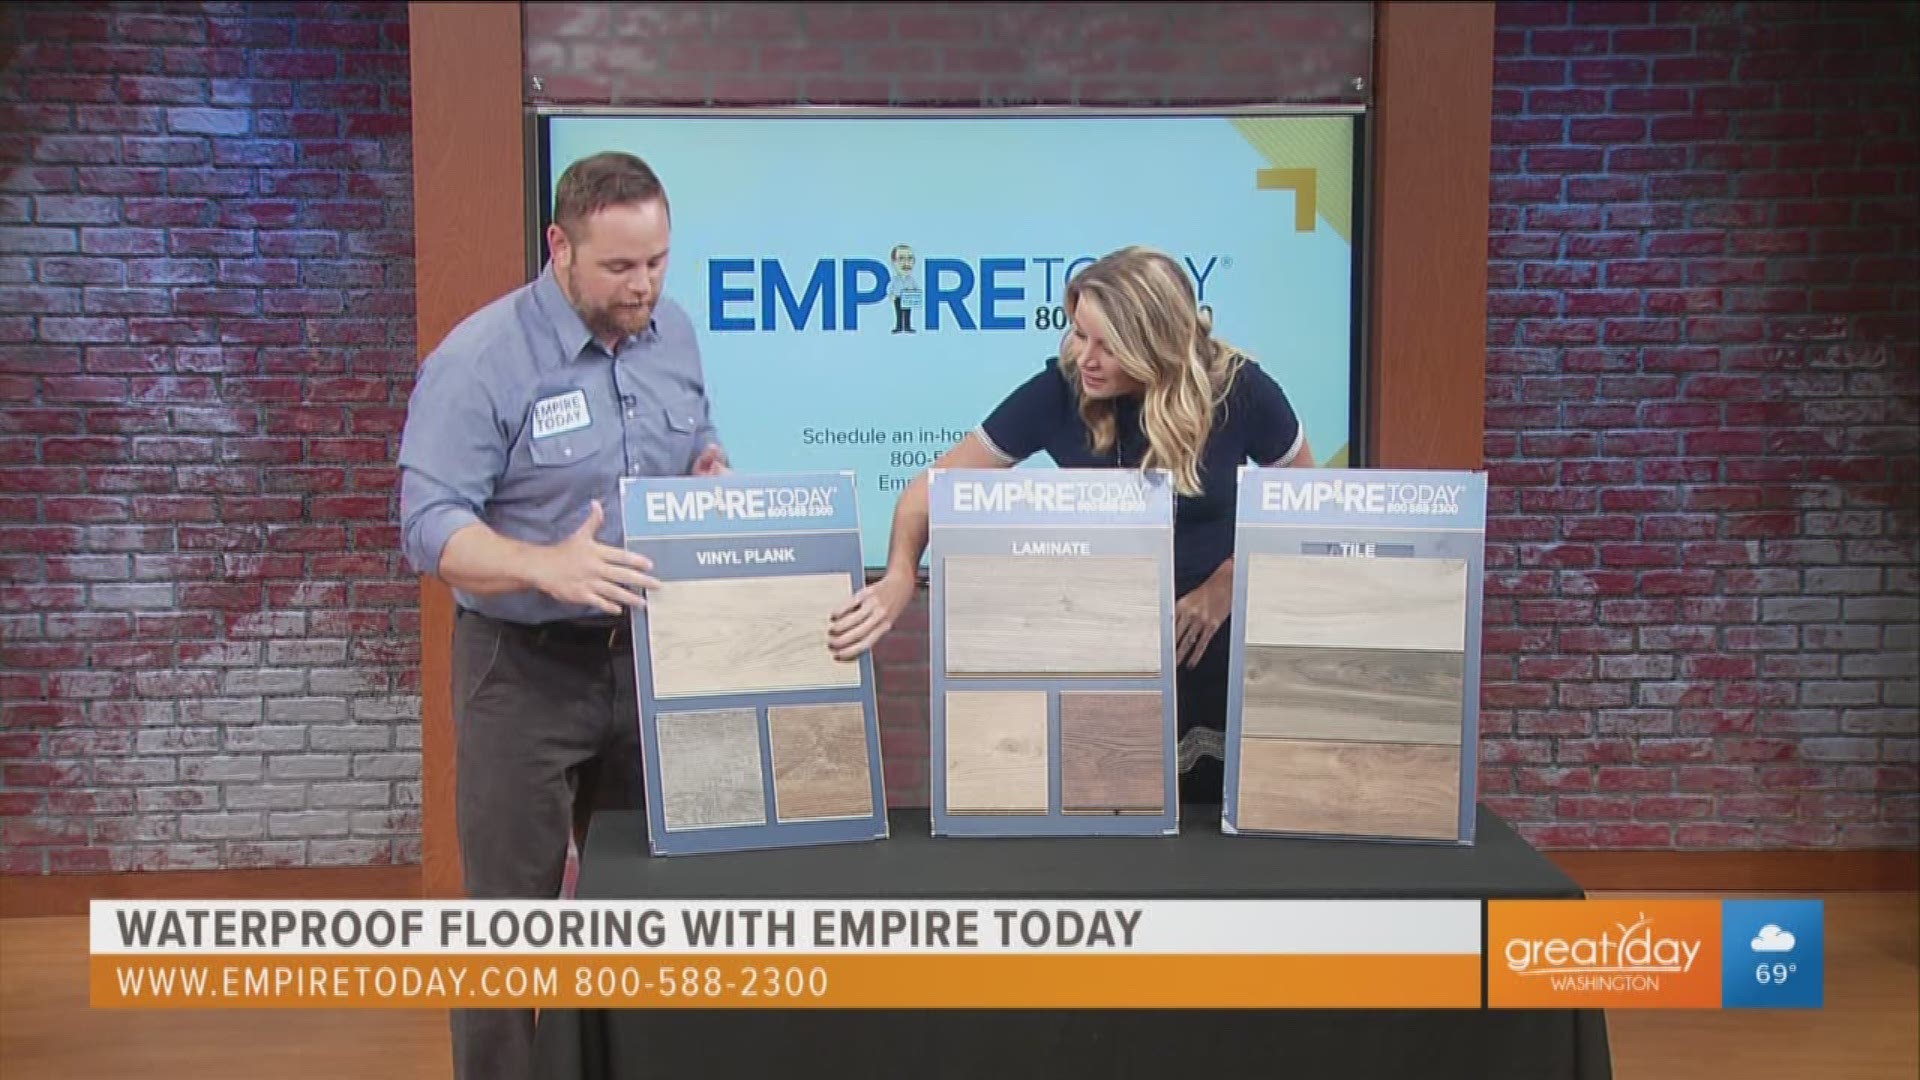 Ryan the Empire Man visits Great Day Washington to show how the waterproof flooring from Empire Today can fit into your home with easy installation. Schedule an in-home appointment now at (800) 588-2300 or visit EmpireToday.com.